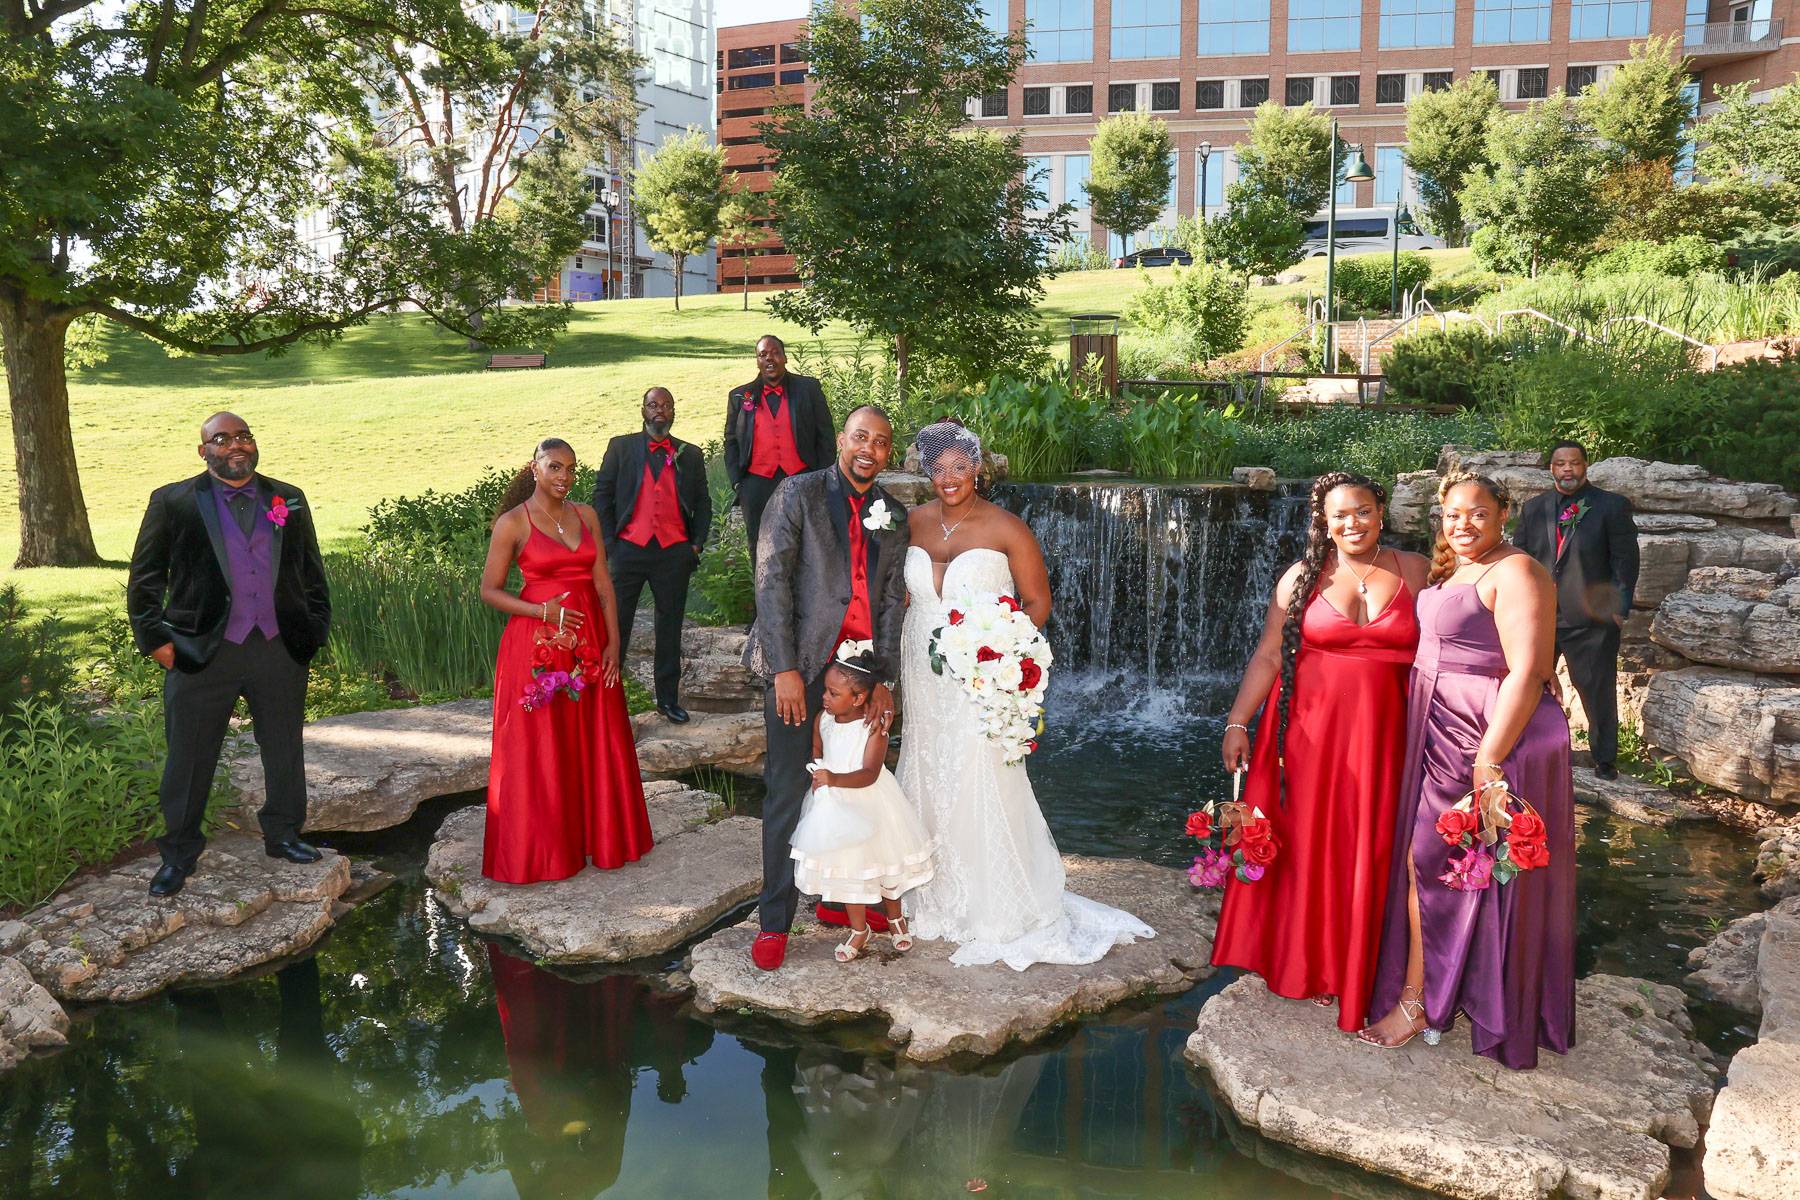 The newlyweds and their attendants surround a pond